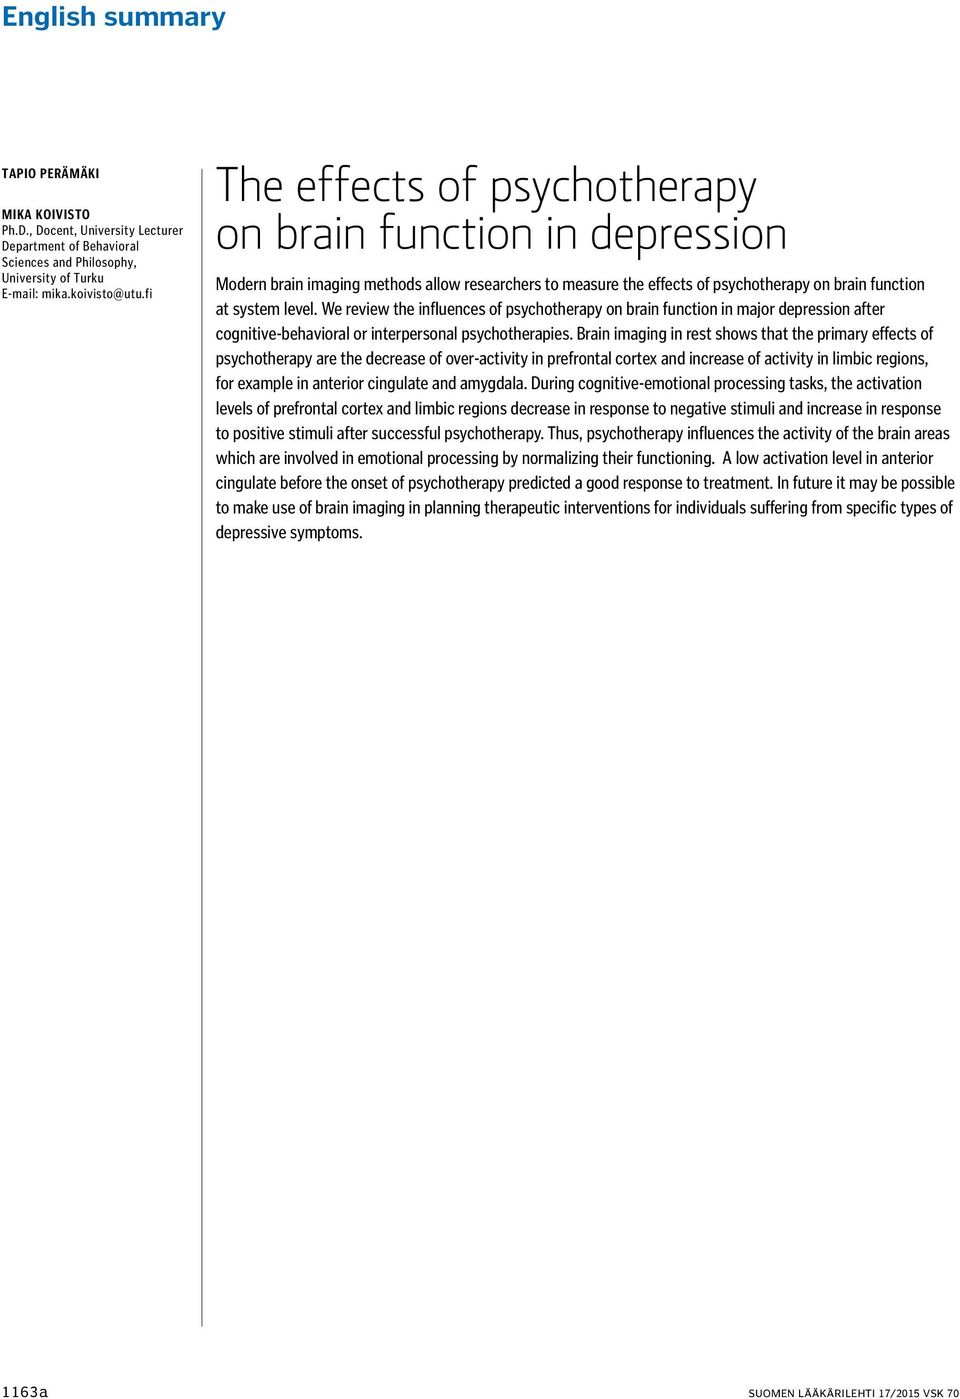 We review the influences of psychotherapy on brain function in major depression after cognitive-behavioral or interpersonal psychotherapies.